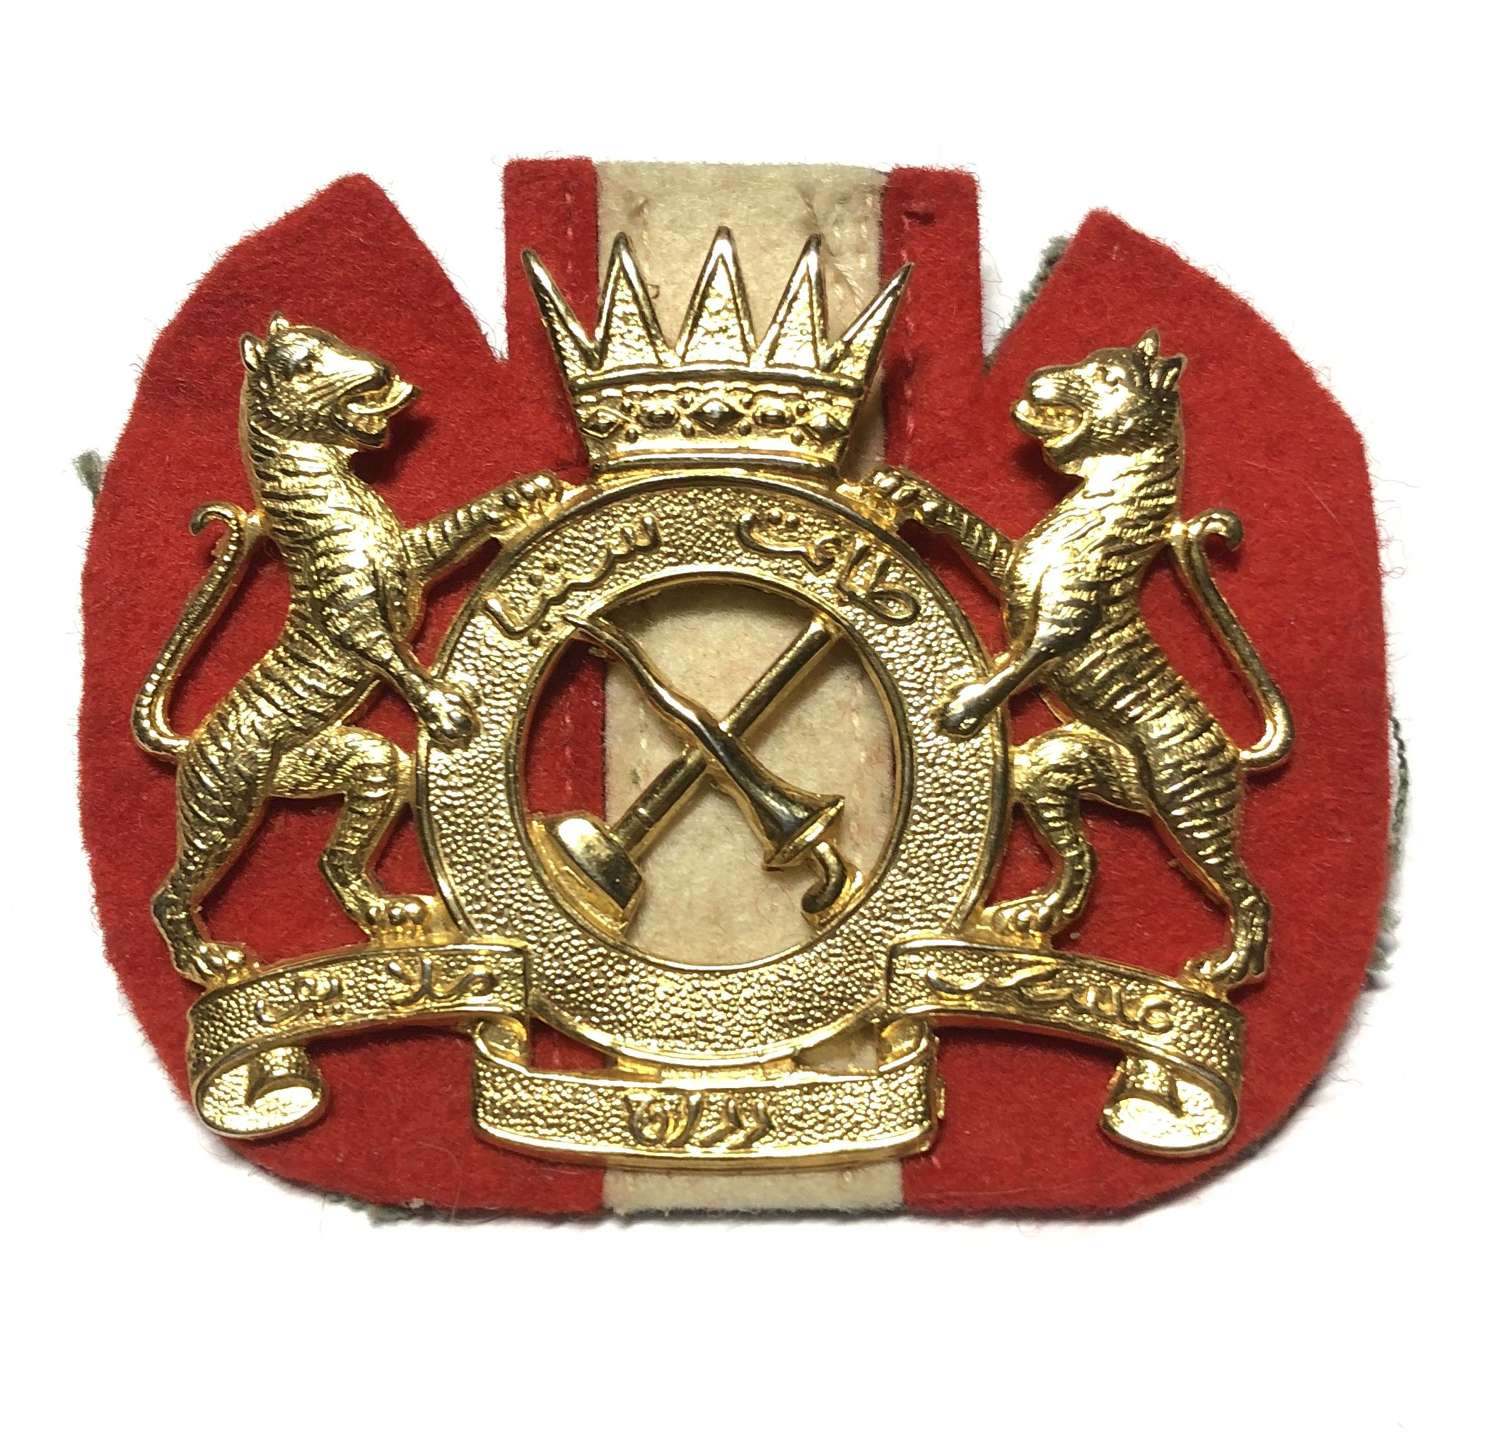 9th Battalion Malay Regiment head dress badge and backing